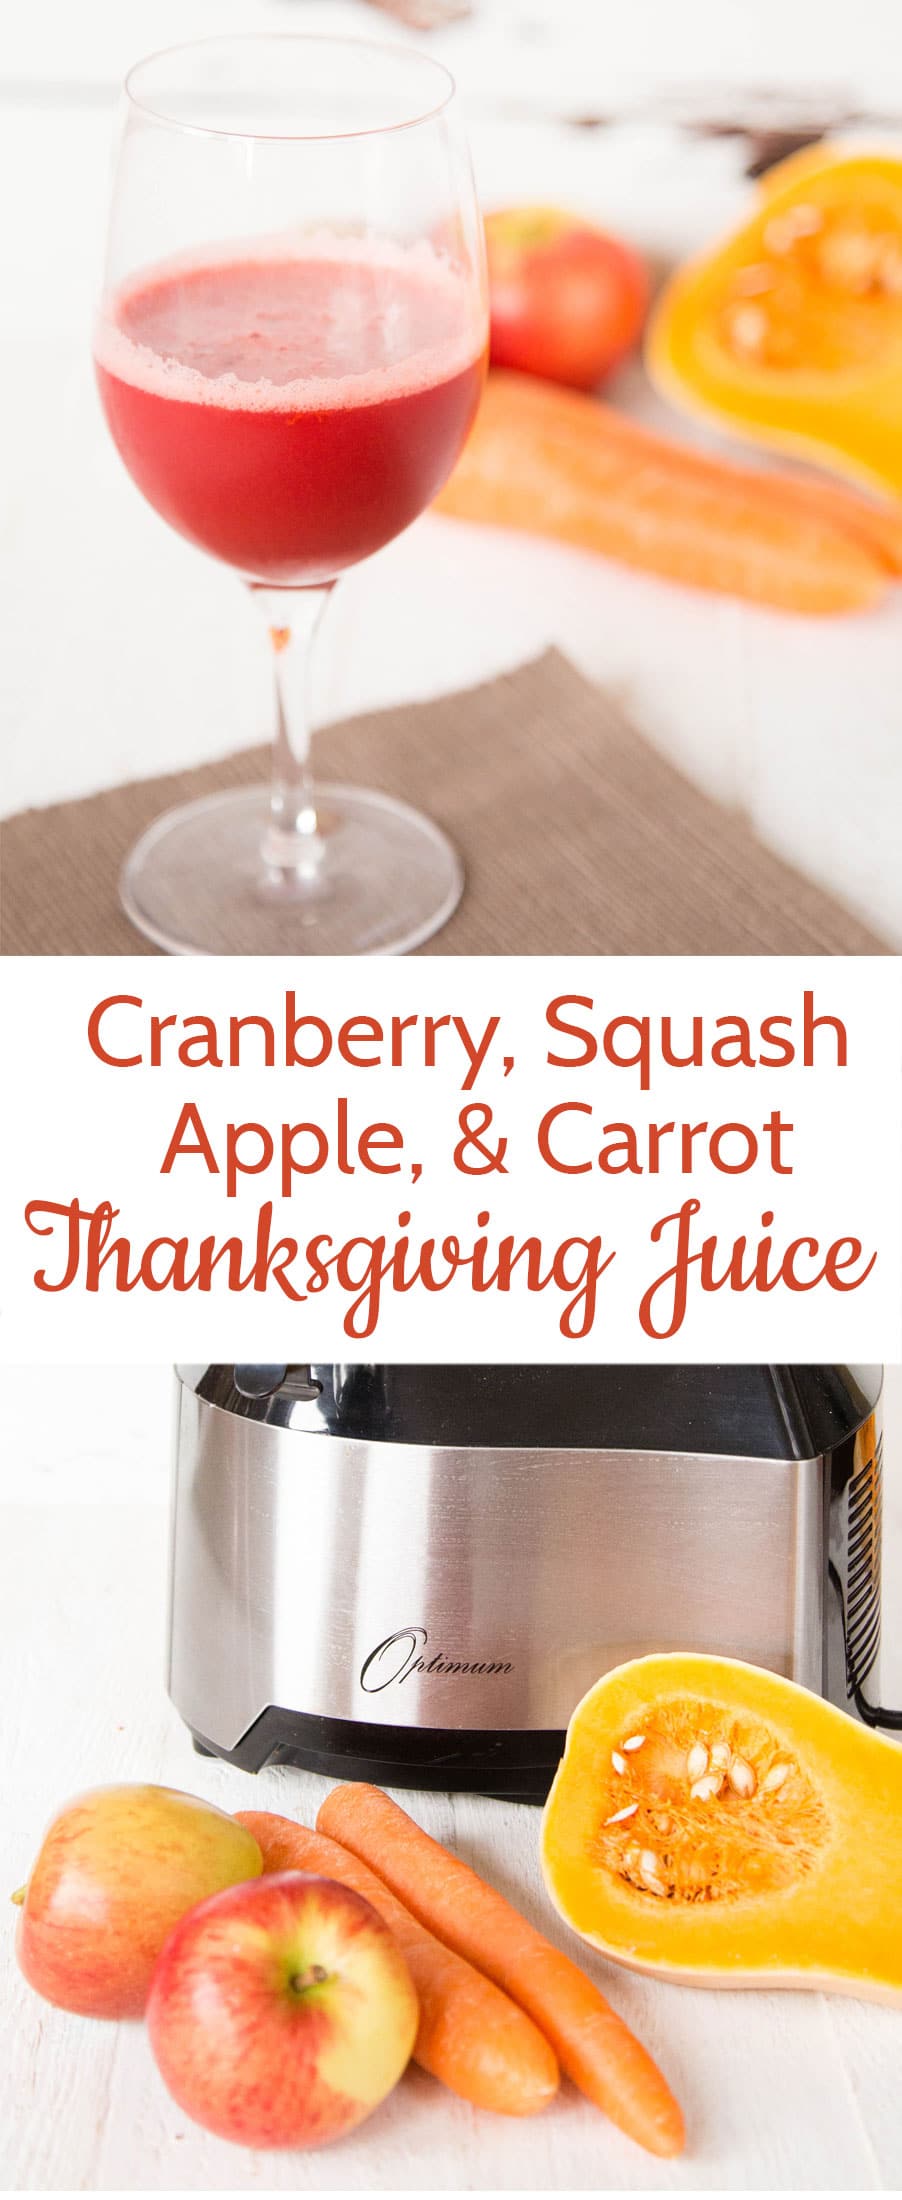 This jewel coloured juice showcases fall fruit and vegetables and with the addition of cranberries is perfect for Thanksgiving.